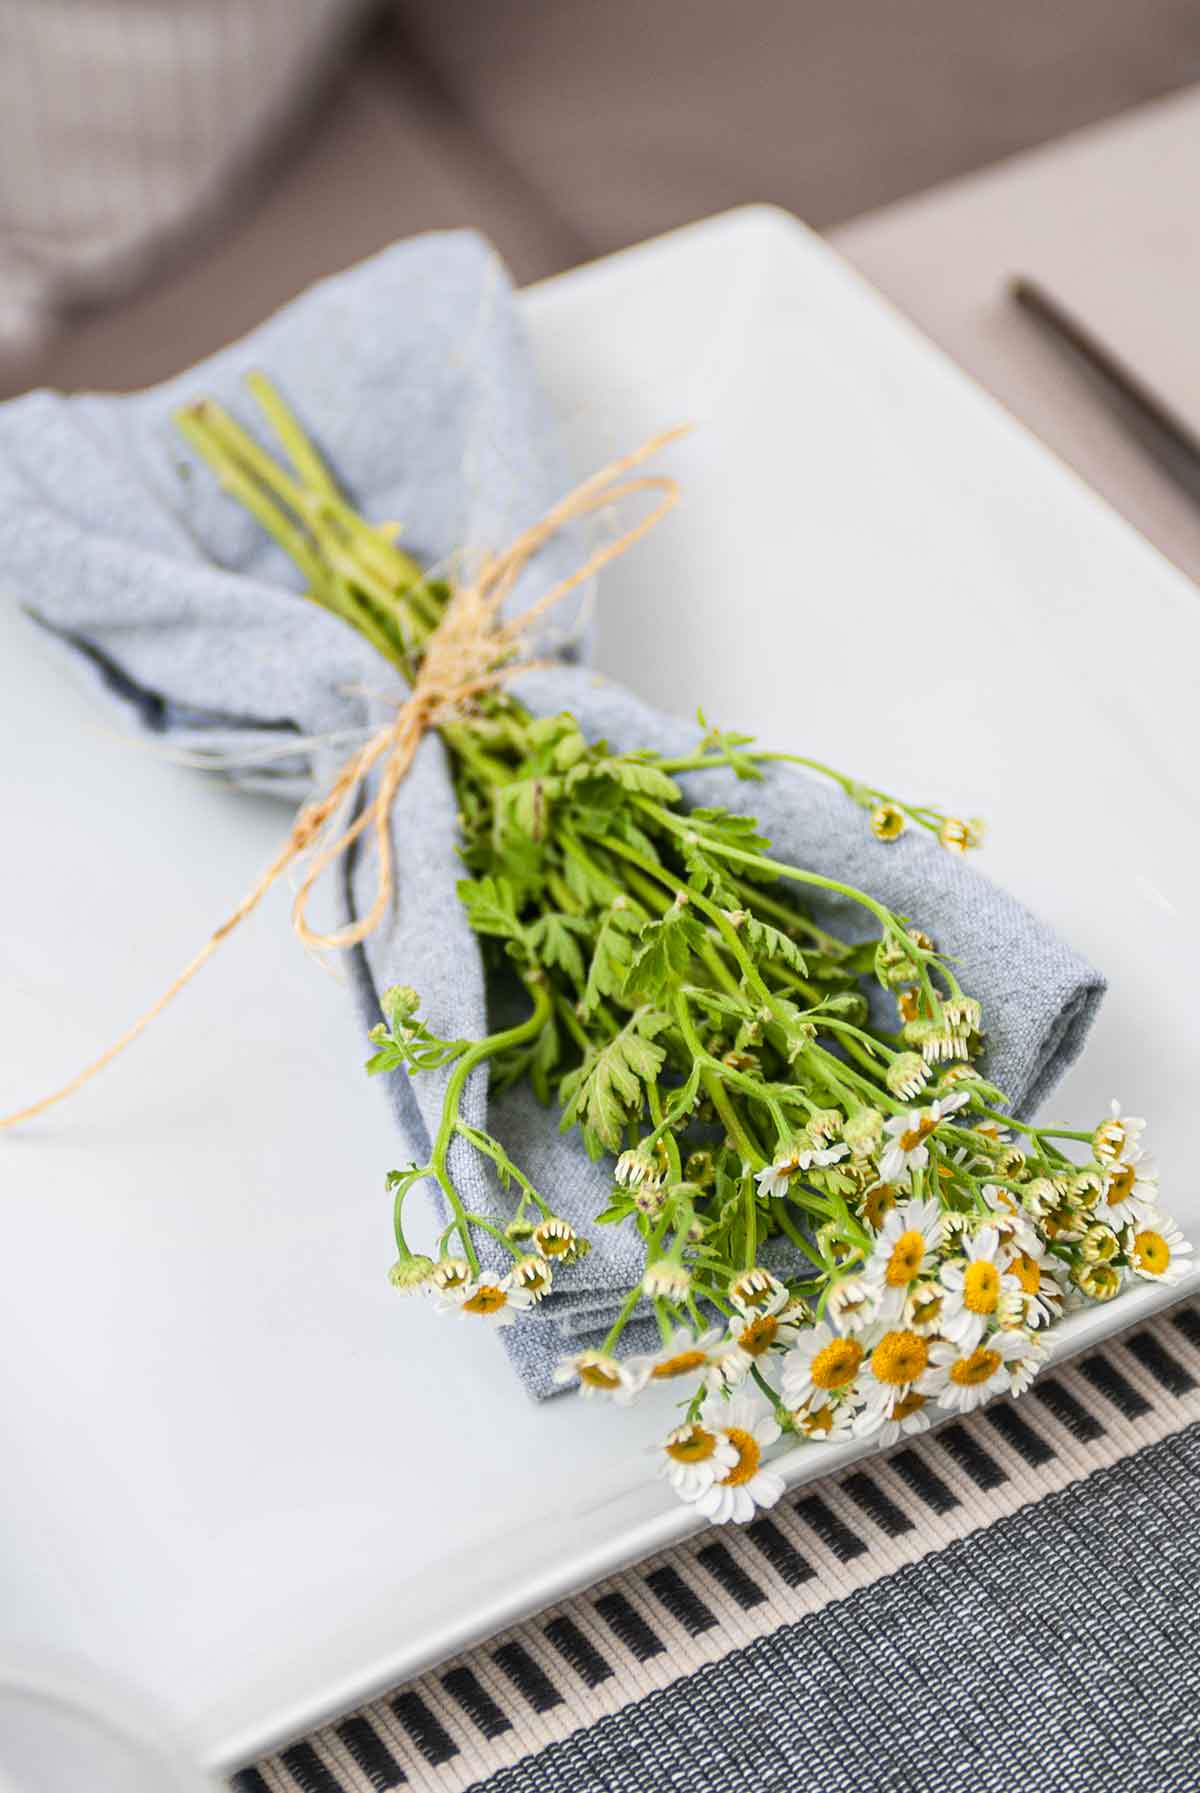 Camomile flowers in a bouquet on a plate.